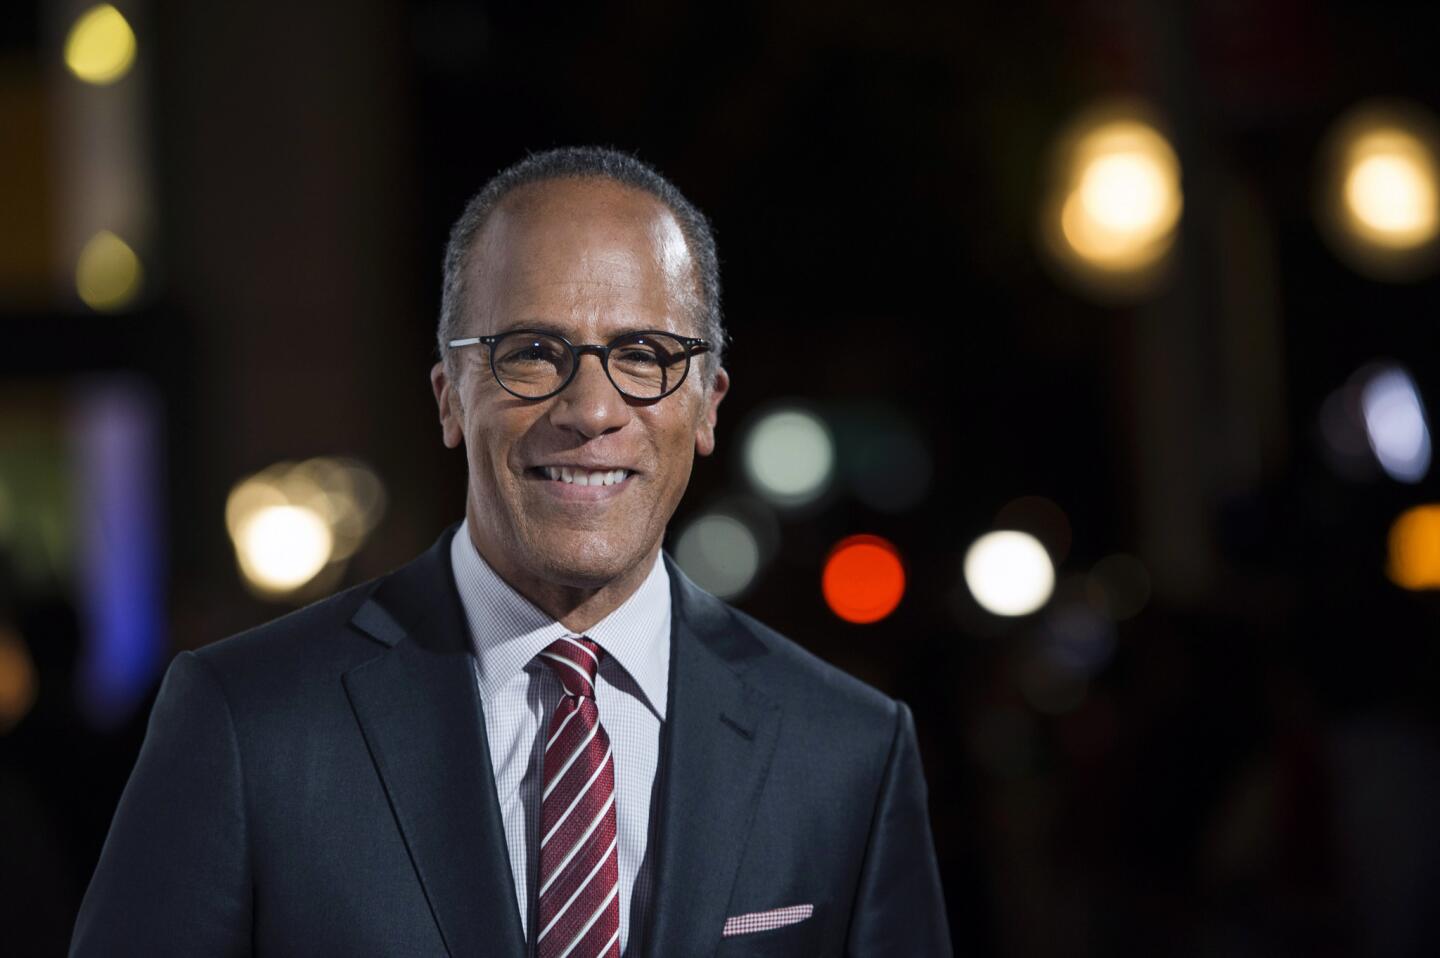 NBC Nightly News anchor Lester Holt will moderate a debate on Sept. 26 at Hofstra University.